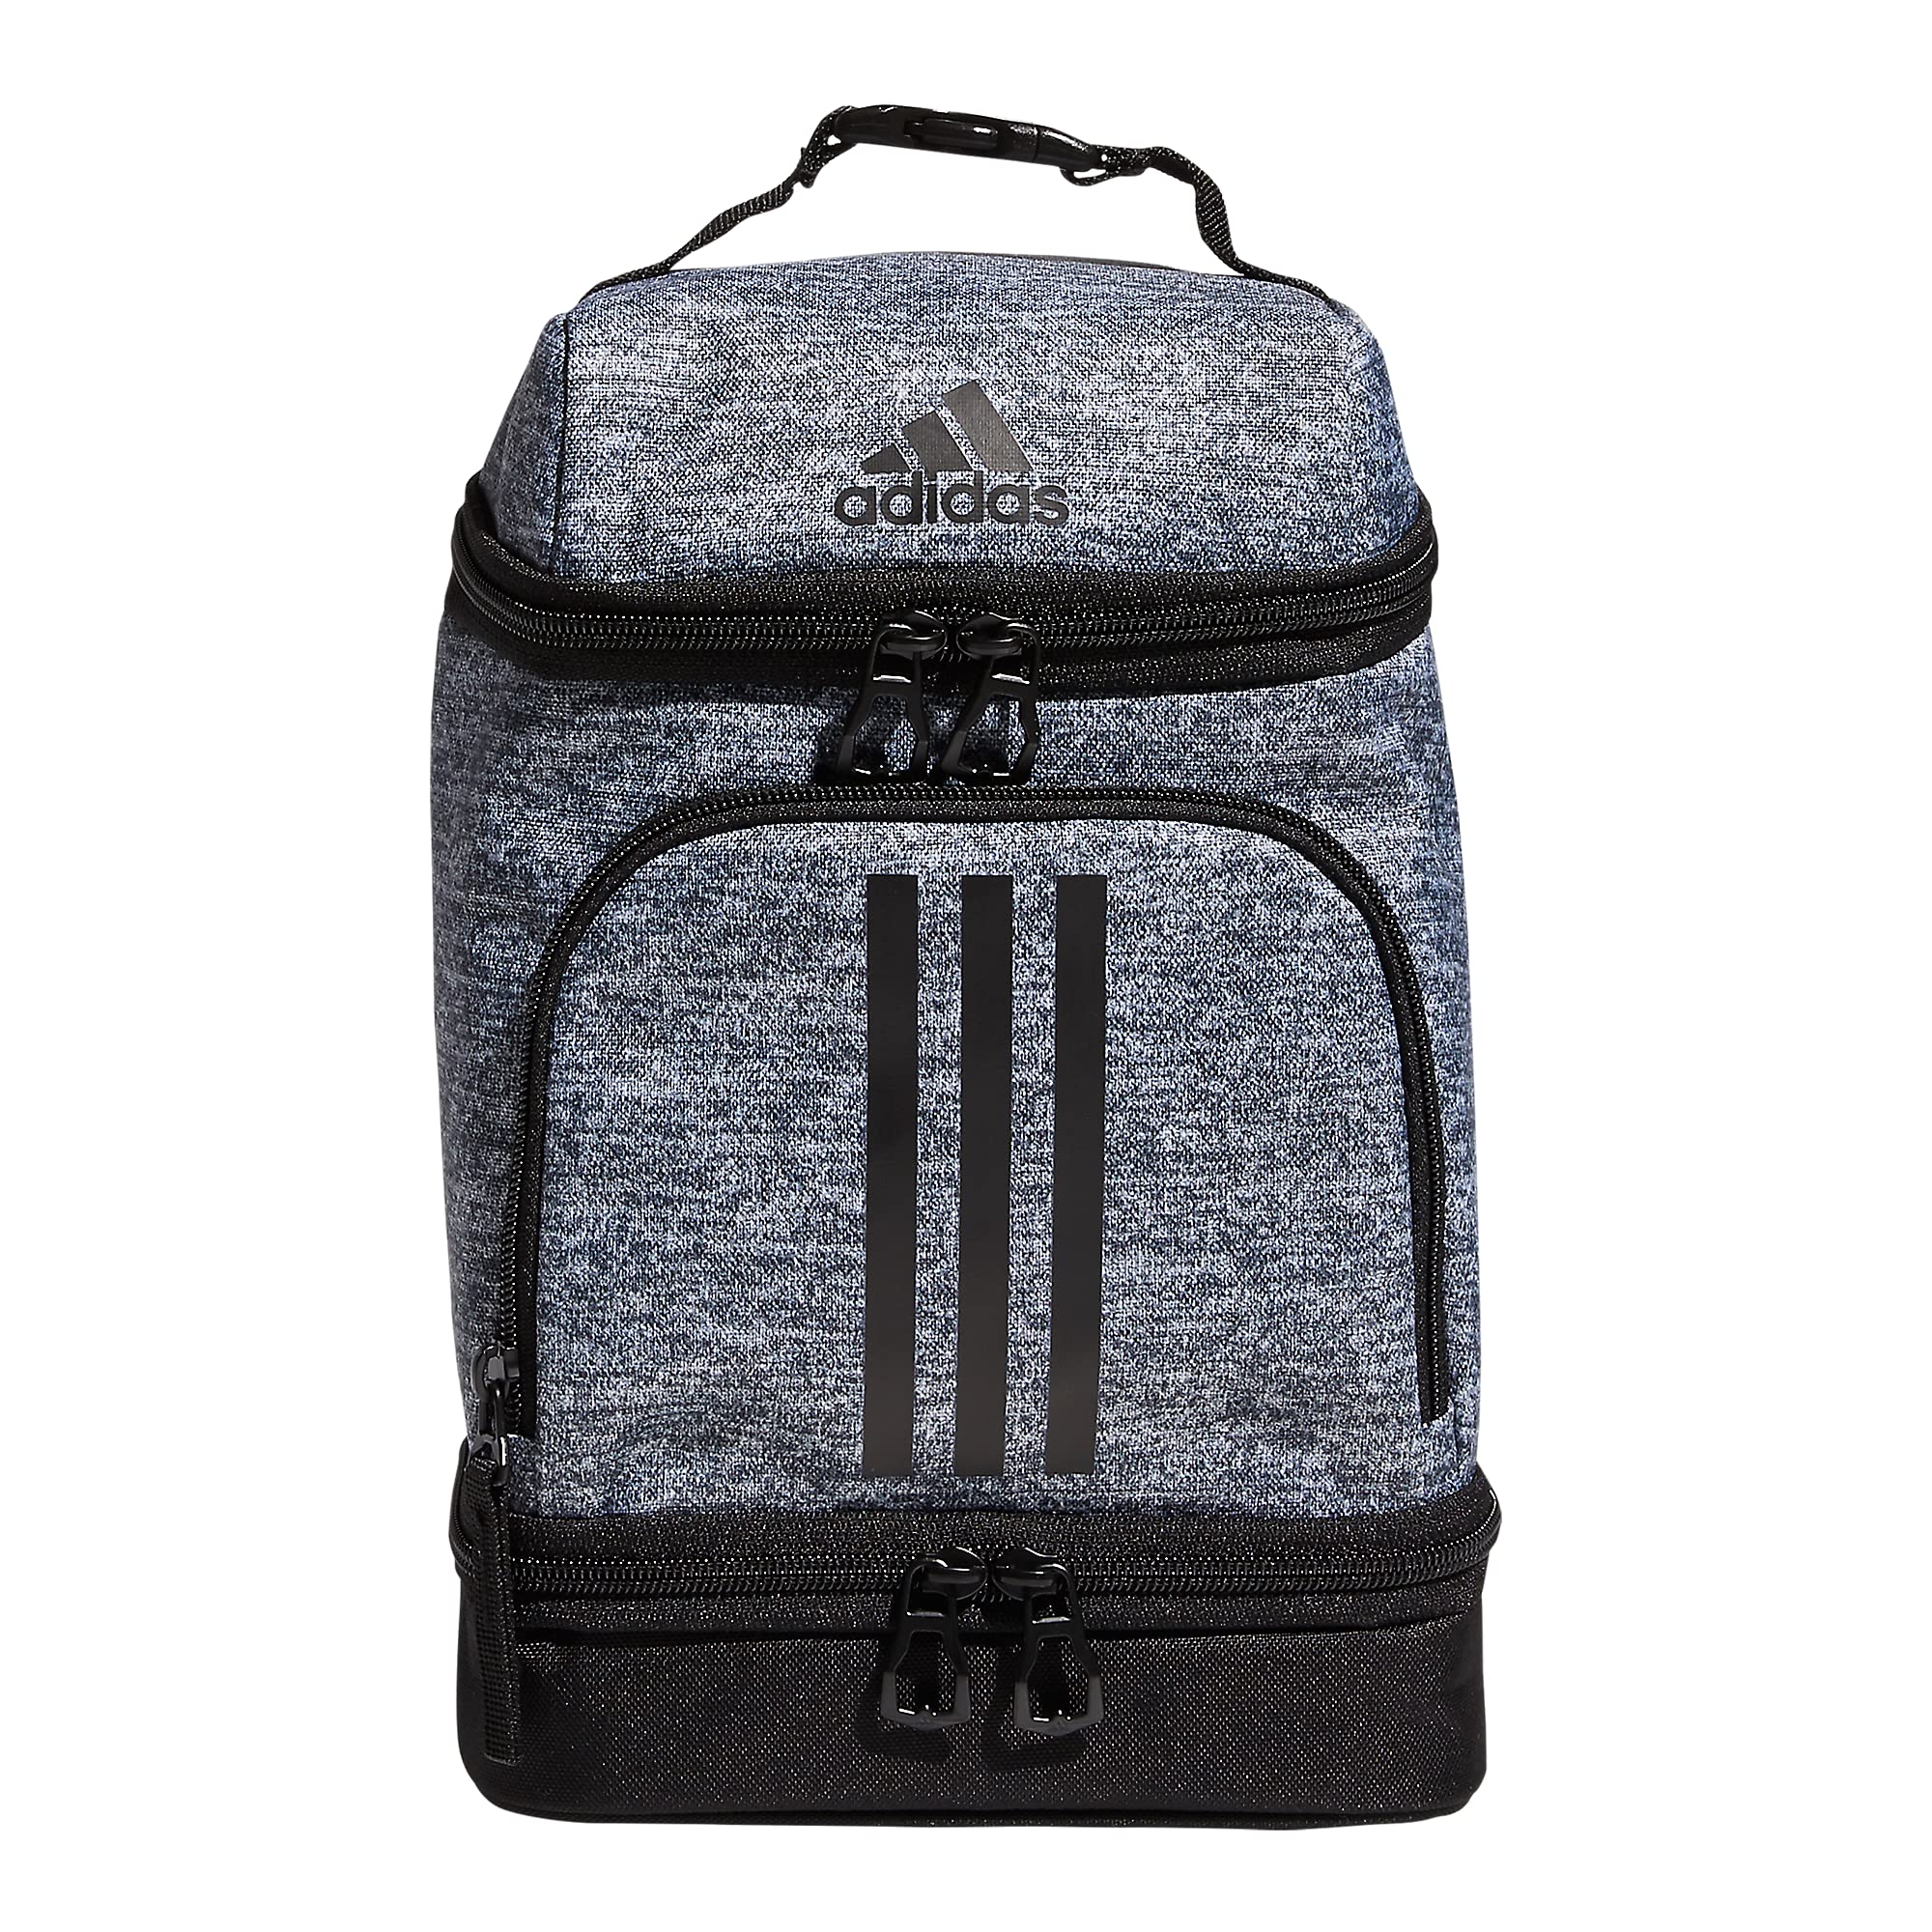 adidas Unisex Excel 2 Insulated Lunch Bag (Jersey Onix Grey/Black) $16 + Free Shipping w/ Prime or on $35+